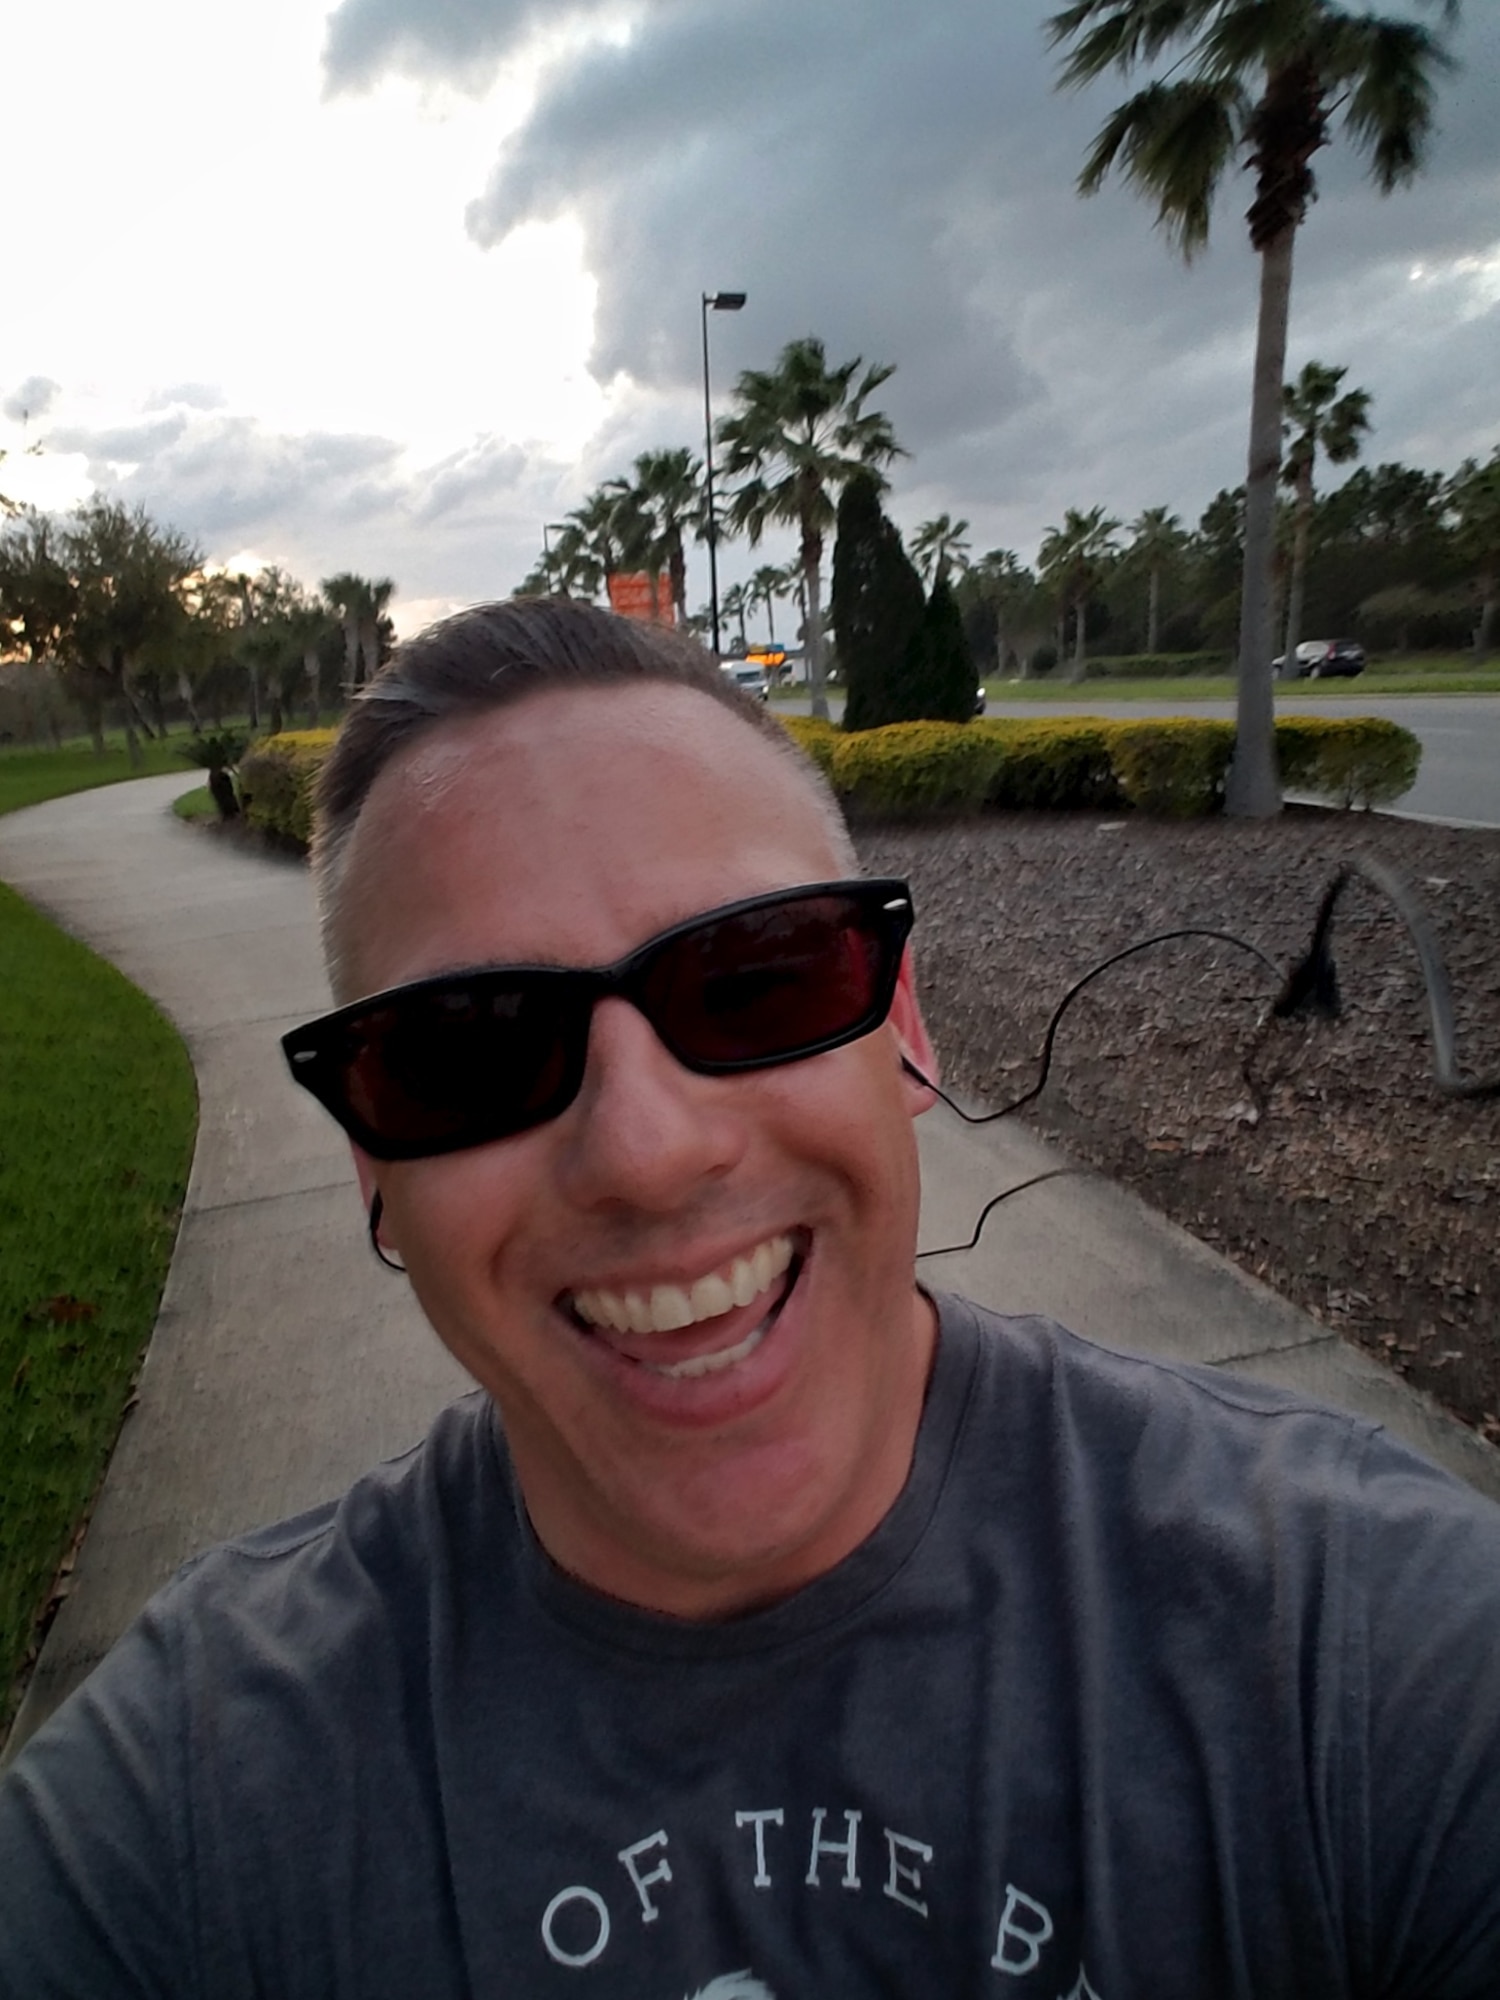 Christopher Parr, 932nd Airlift Wing Public Affairs specialist, grabs a quick "running selfie" while in Florida for the Air Force Association's Air Warfare Symposium.  Despite traveling to vacation destinations,  Parr said he needed to get in his runs for the Scott Health Promotion Running Clinic. You can follow along as Parr documents his journey to becoming a better runner in the commentaries section of the 932nd AW website. http://www.932aw.afrc.af.mil/News/Commentaries.aspx  (U.S. Air Force photo by Christopher Parr)